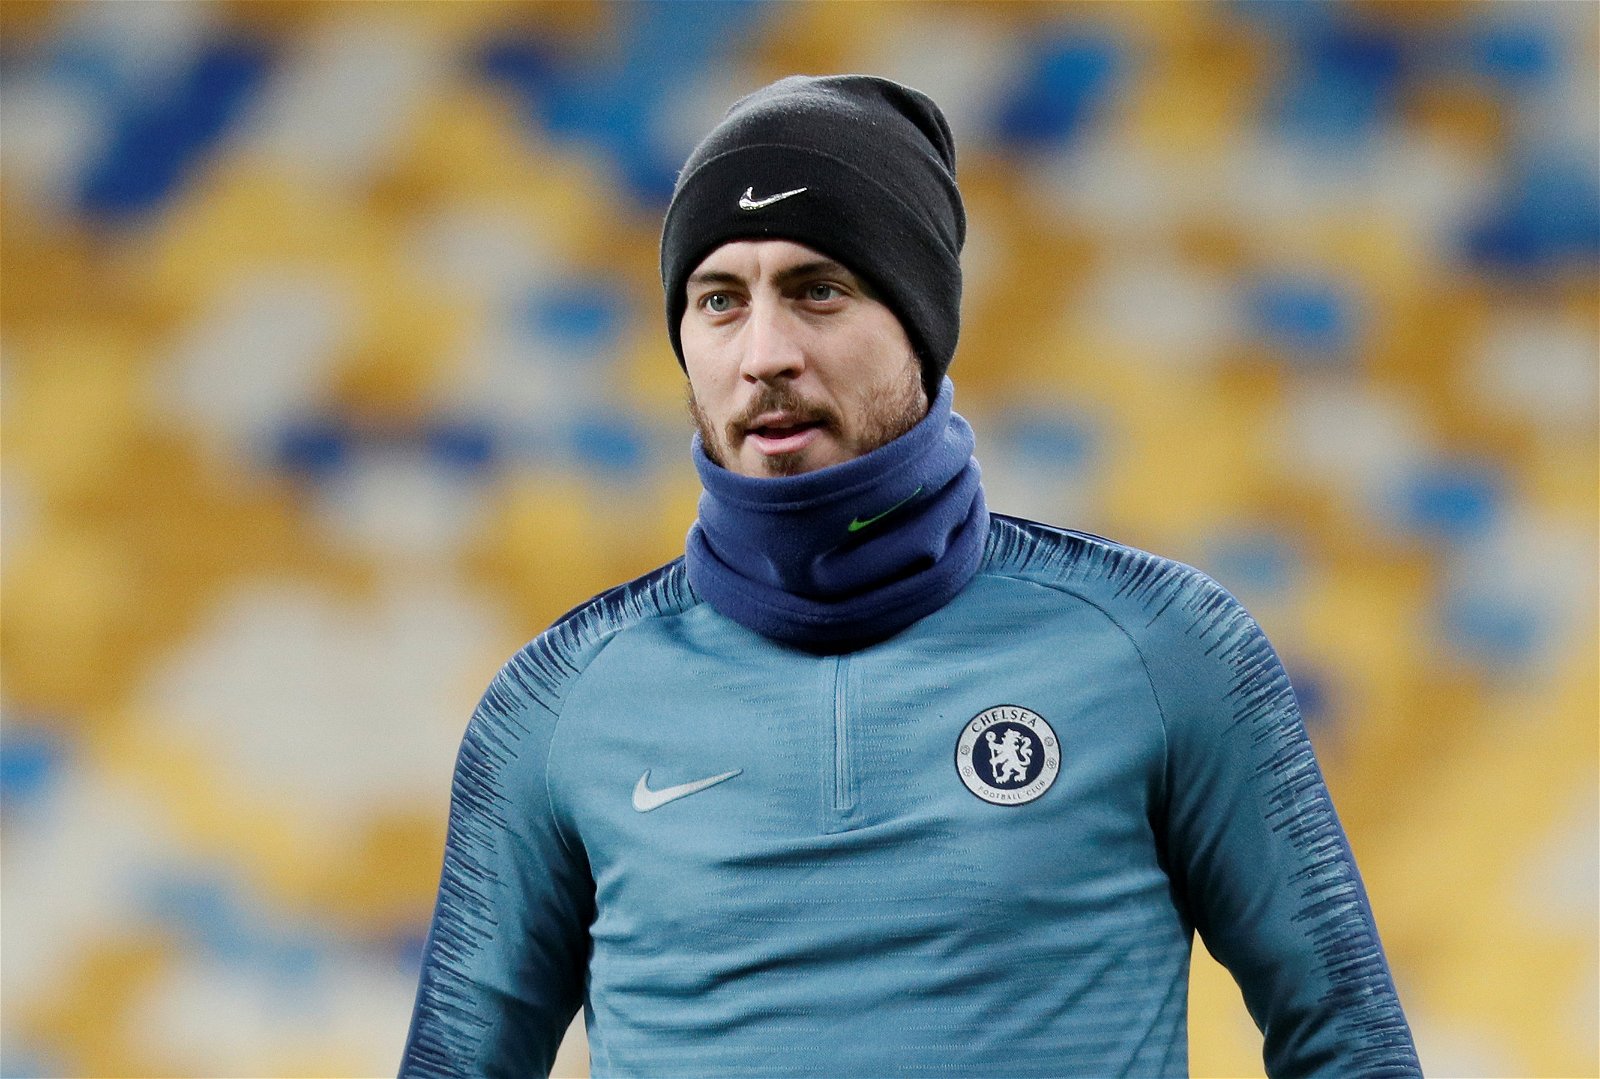 Chelsea players tell Hazard to stay